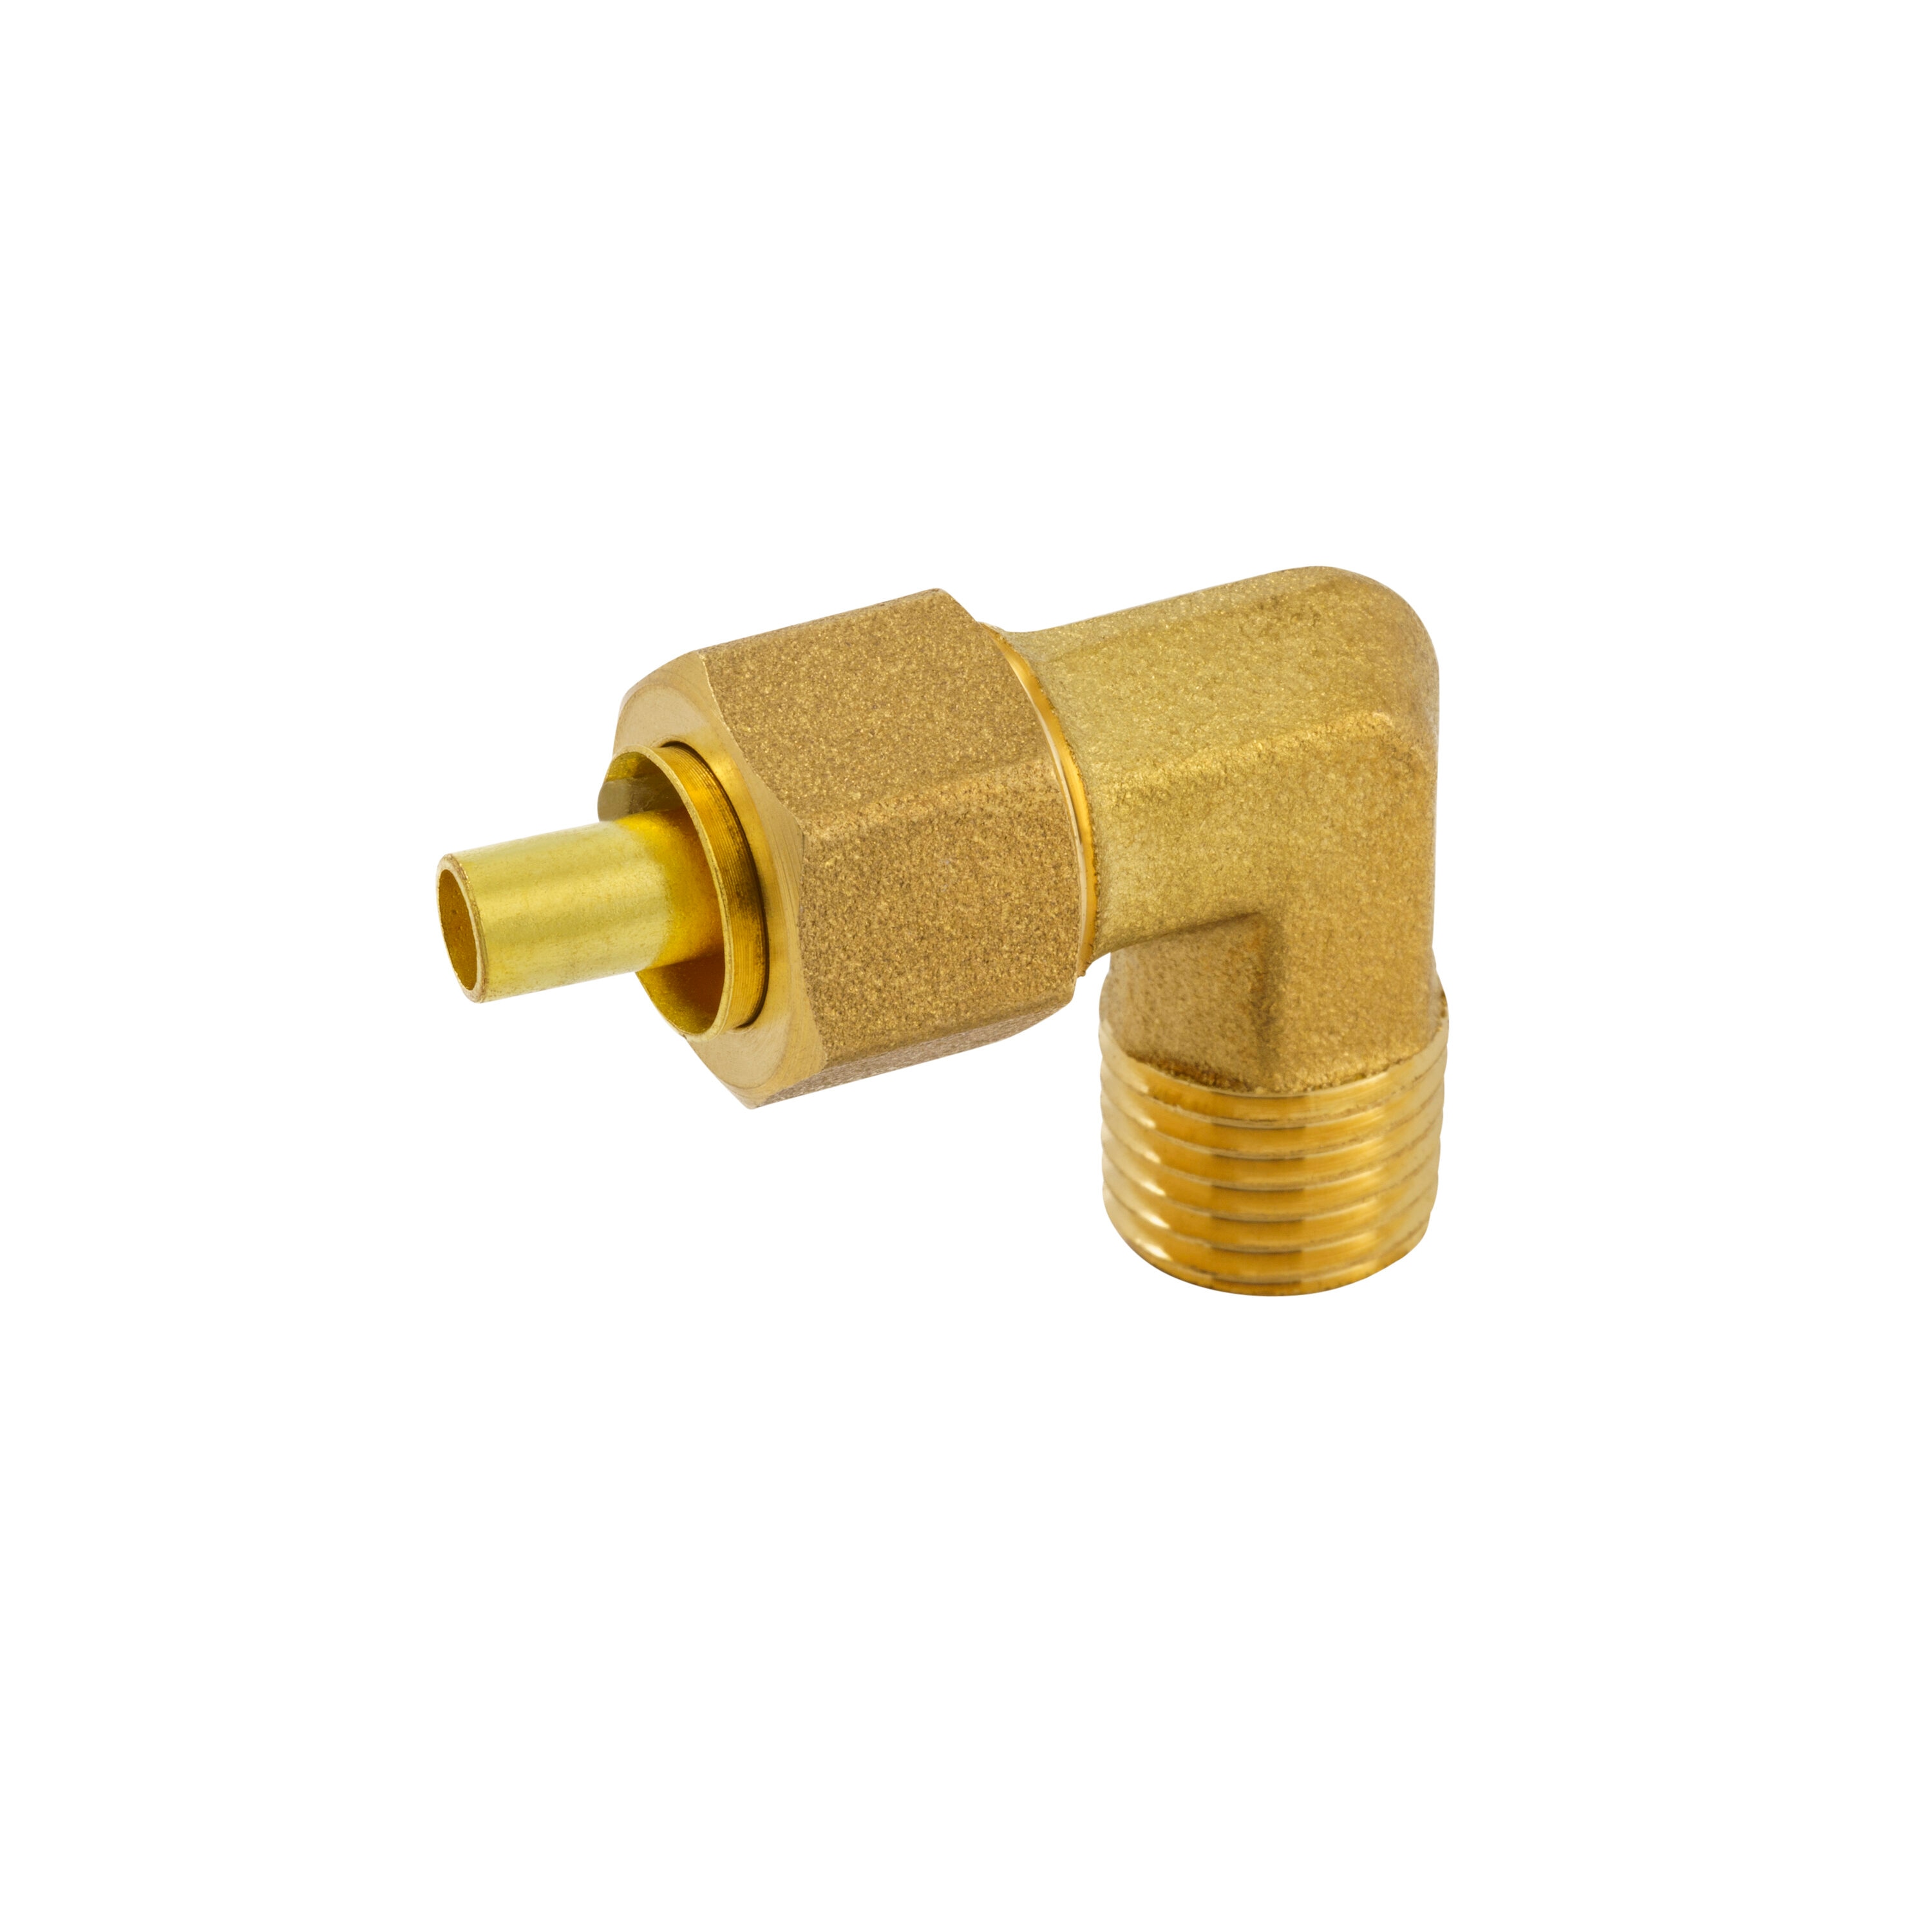 Proplus Part # 272413 - Proplus 3/8 In. X 3/8 In. Mip 90-Degree Lead Free Brass  Compression Elbow - Brass Compression Elbows - Home Depot Pro